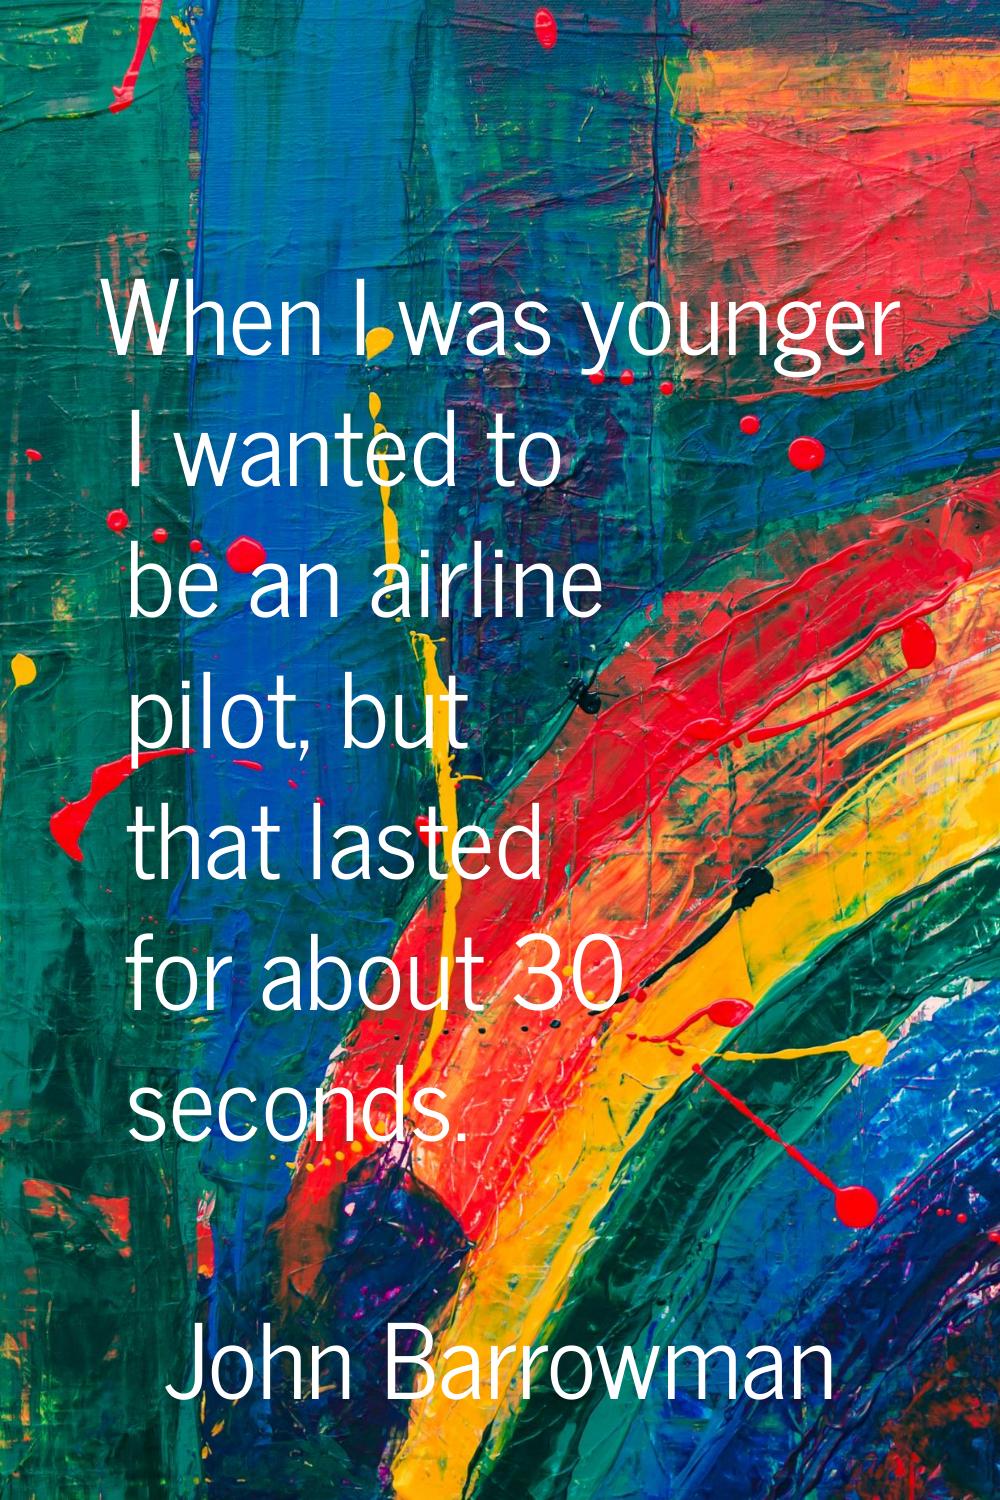 When I was younger I wanted to be an airline pilot, but that lasted for about 30 seconds.